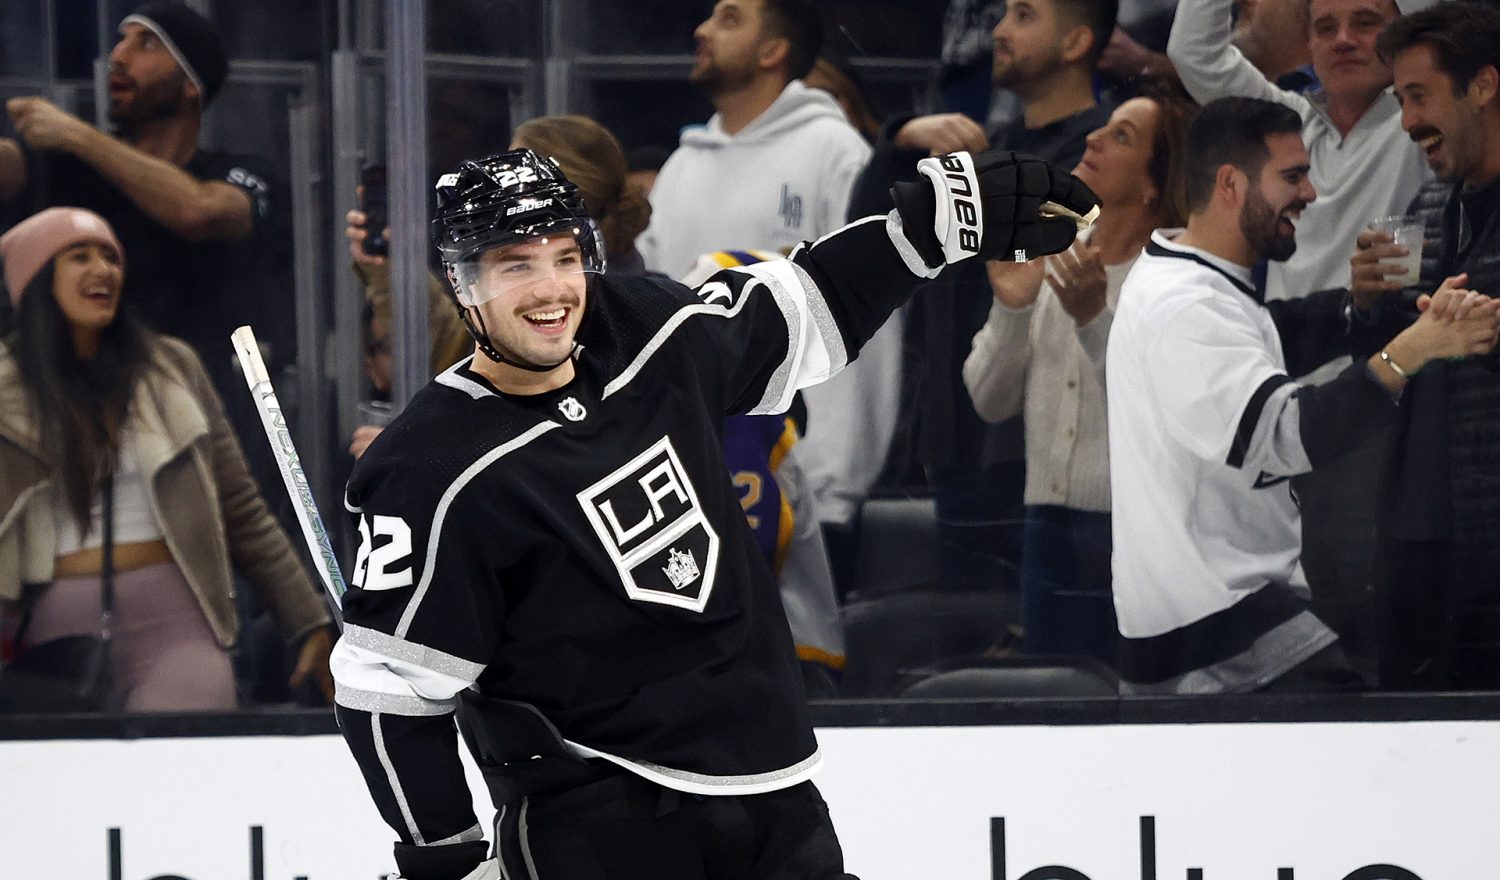 LA Kings Notes: Kings Add New Coach, Defense Shaping Up, Next